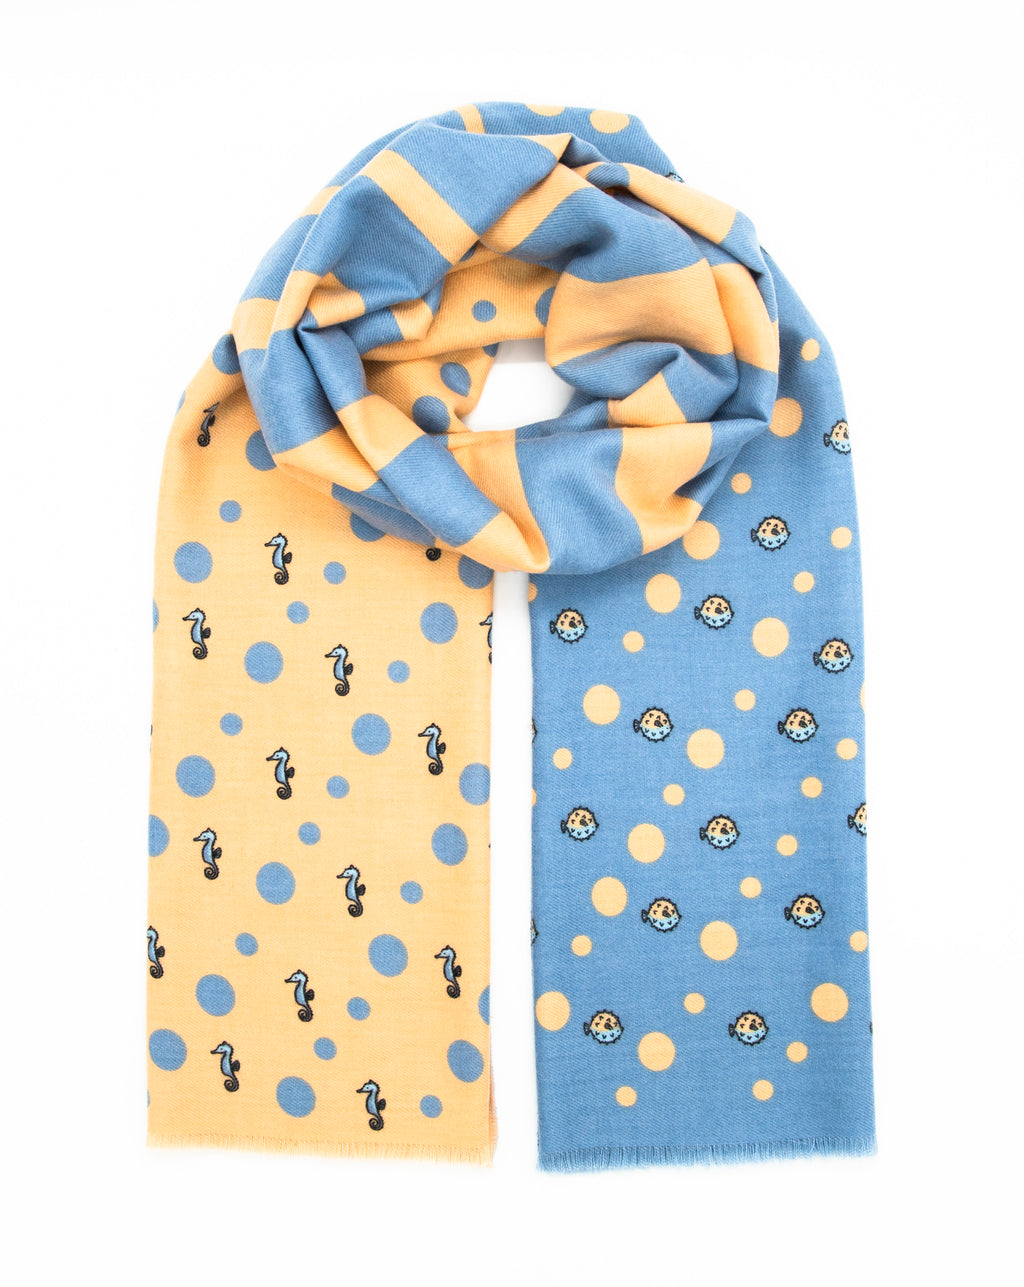 Beige and light blue scarf with marine pattern, sea horse and blow fish patterns. Scarves for women. Scarves for men.